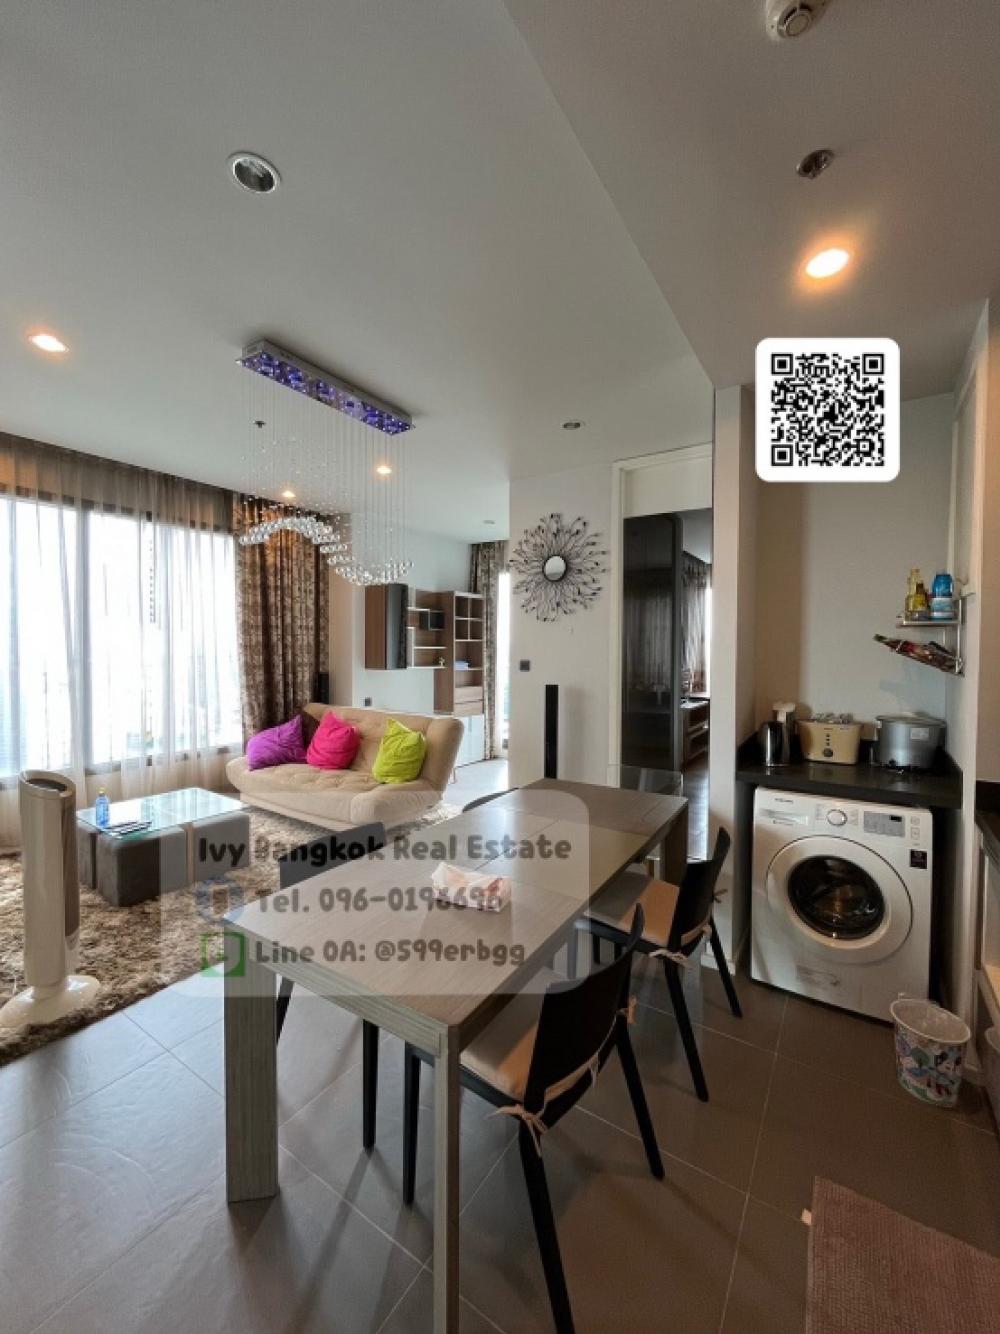 For RentCondoLadprao, Central Ladprao : 🔥HOT🔥FOR RENT‼️M Ladprao #PetFriendlyCondo 🐶😻 M Ladprao for rent 🐶 Pets allowed 🐱 ** 2 pets, no fee ** Location next to BTS / next to Central Ladprao Mall 🚄 BTS HA YEAK LADPRAO 🚅 MRT PHAHONYOTHIN 👜 CENTRAL LADPRAO 👜UNION MALL